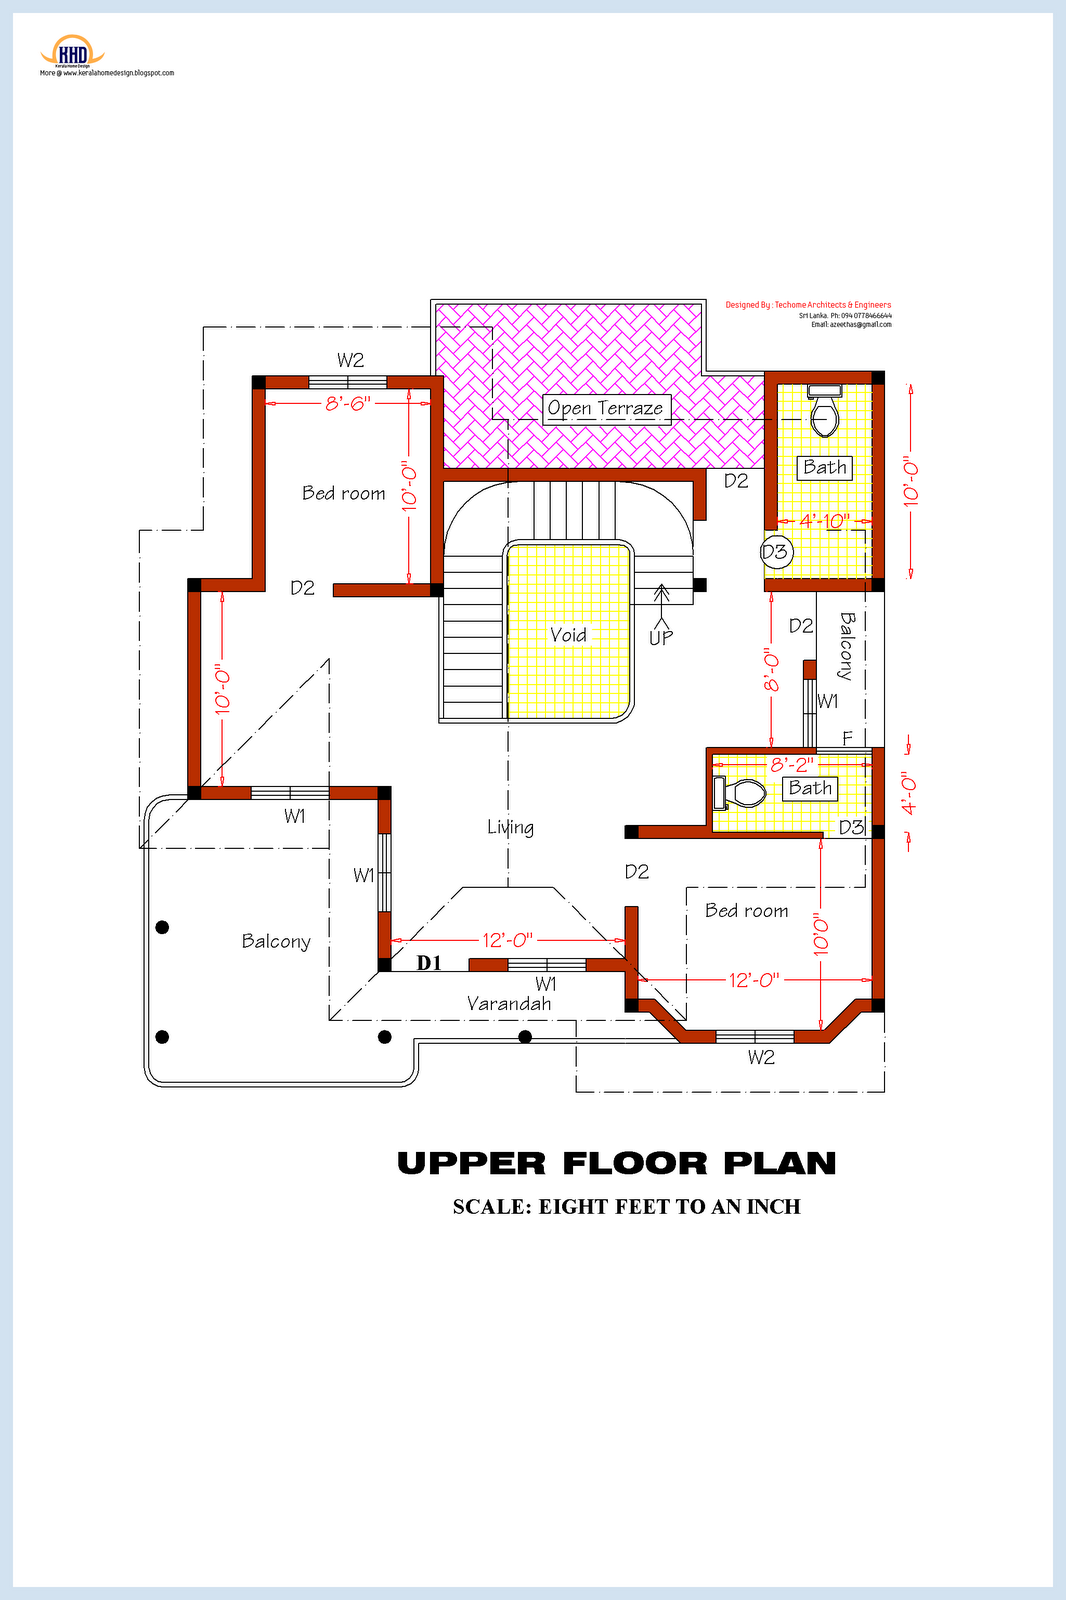 For more information about this home plan ( Sri Lankan home plans )